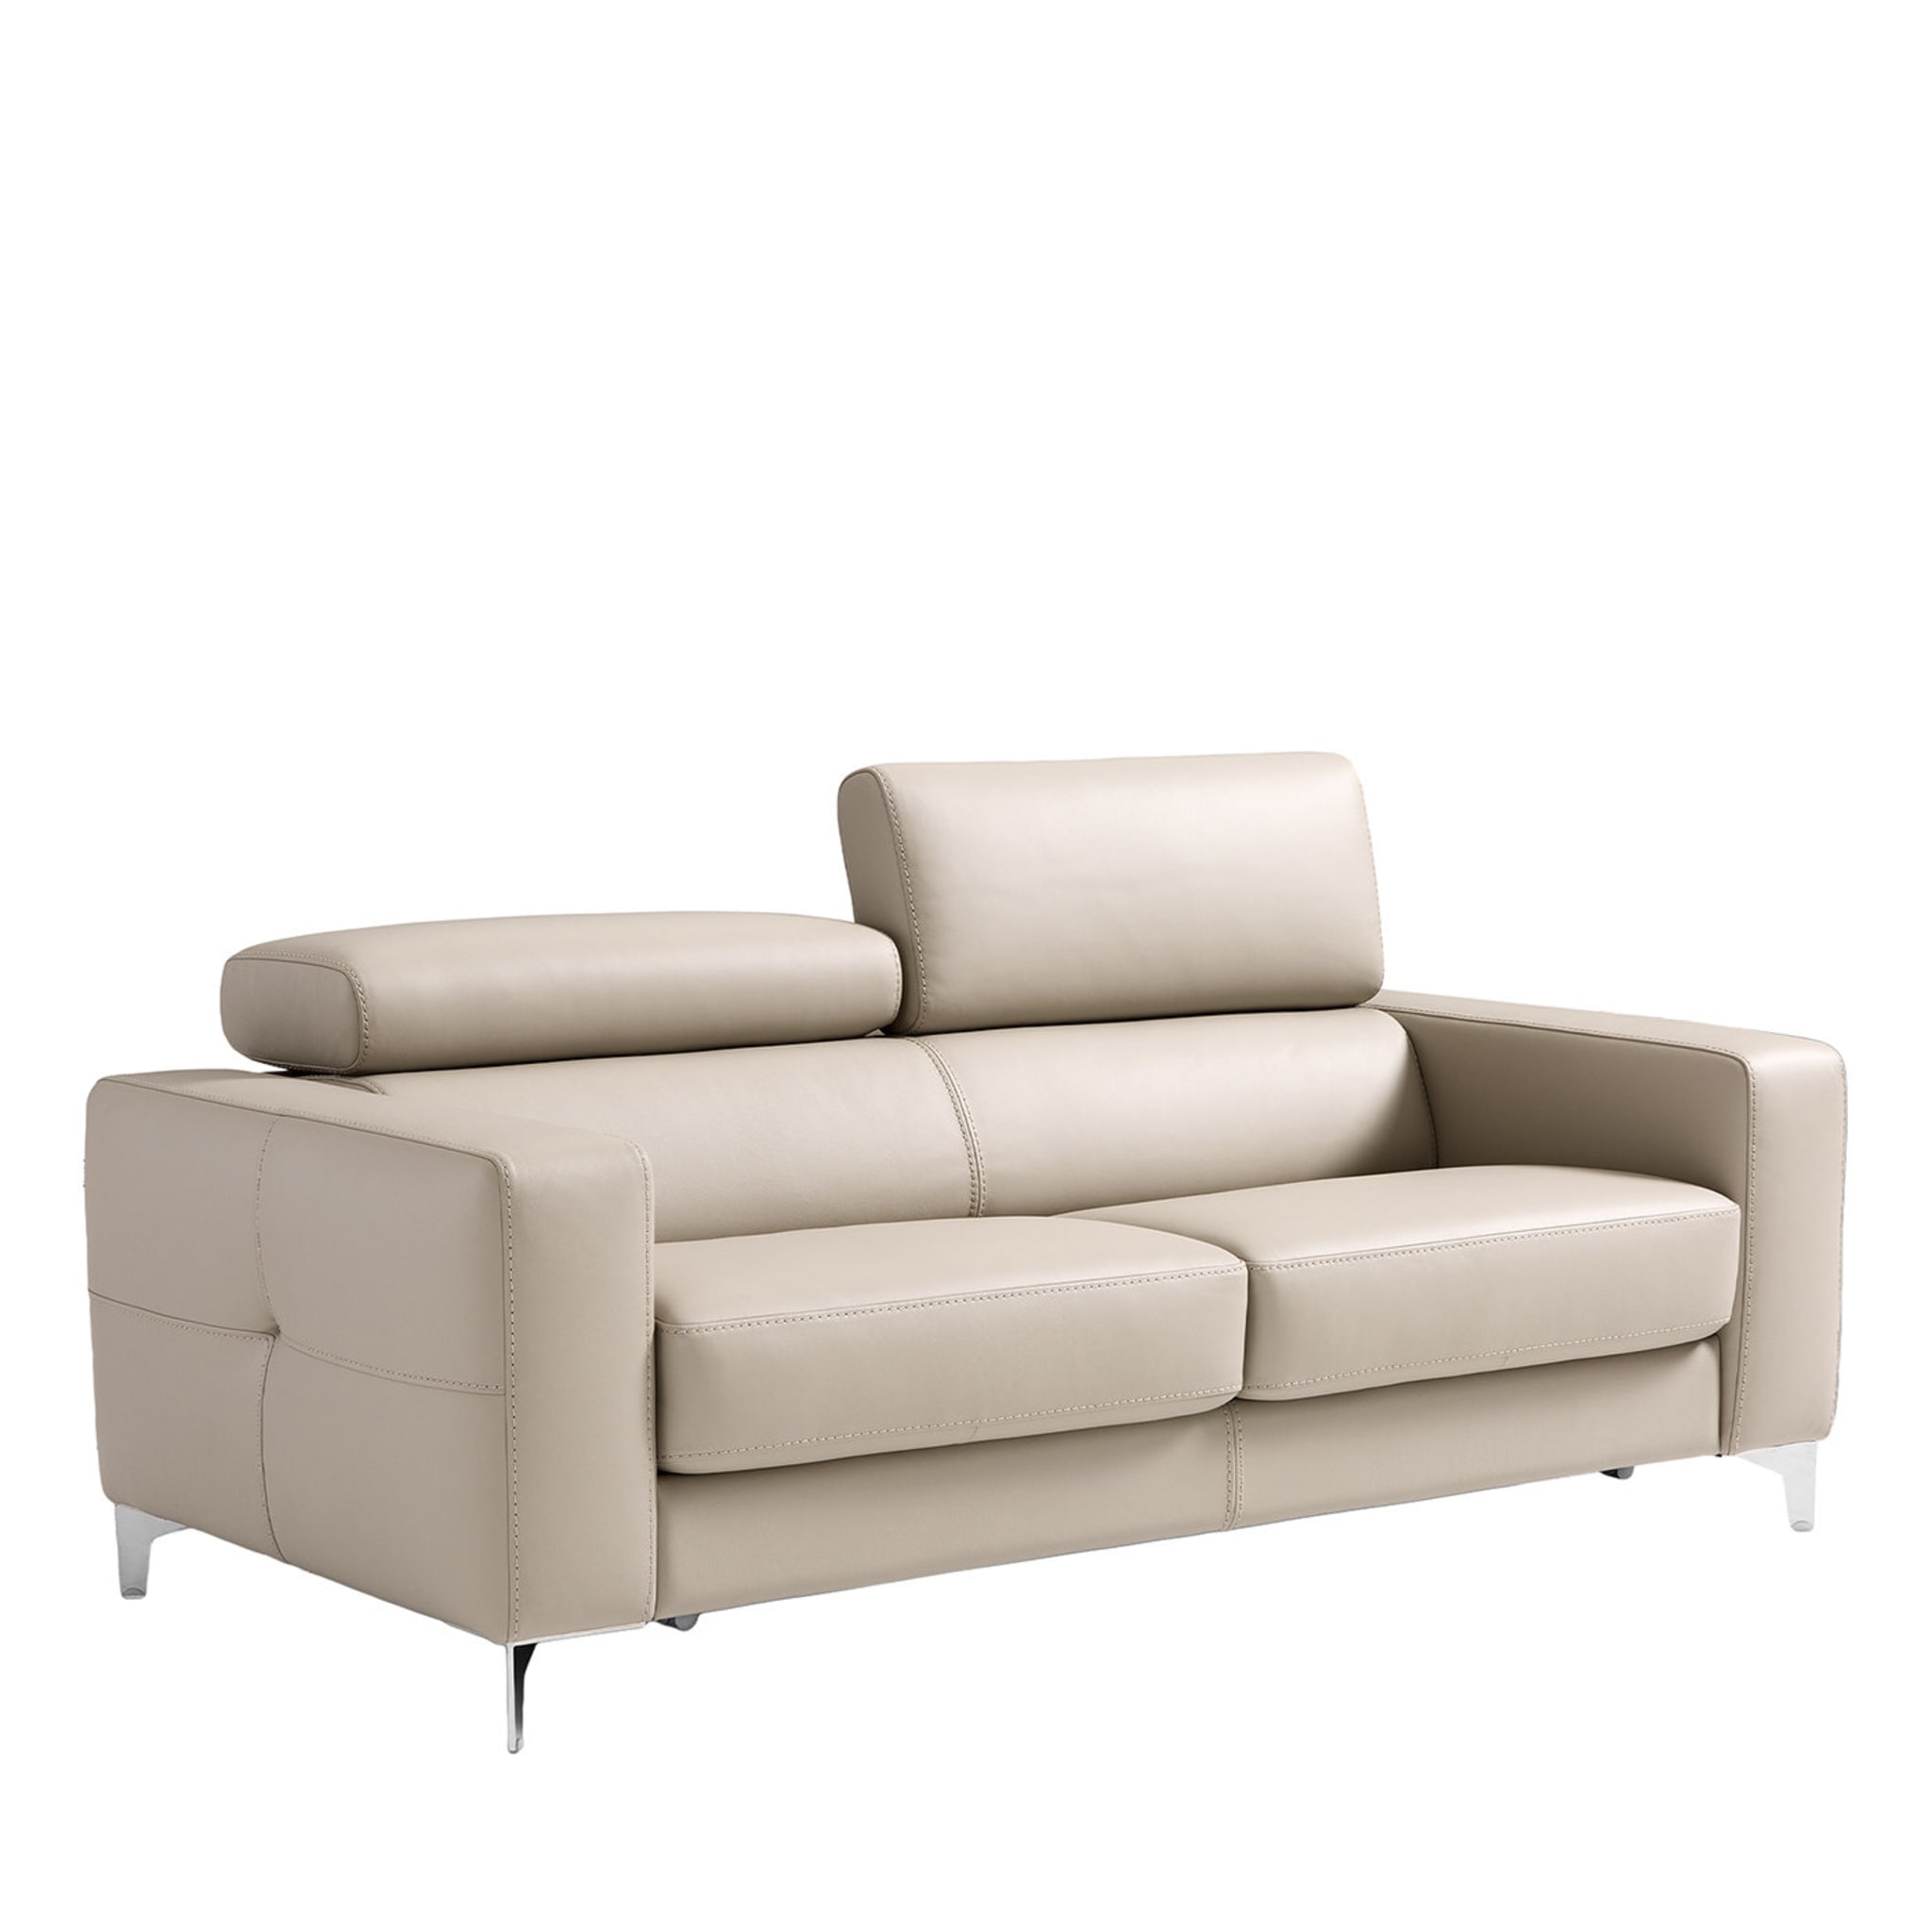 Verona Beige Leather 2-Seater Sofa Bed - Main view